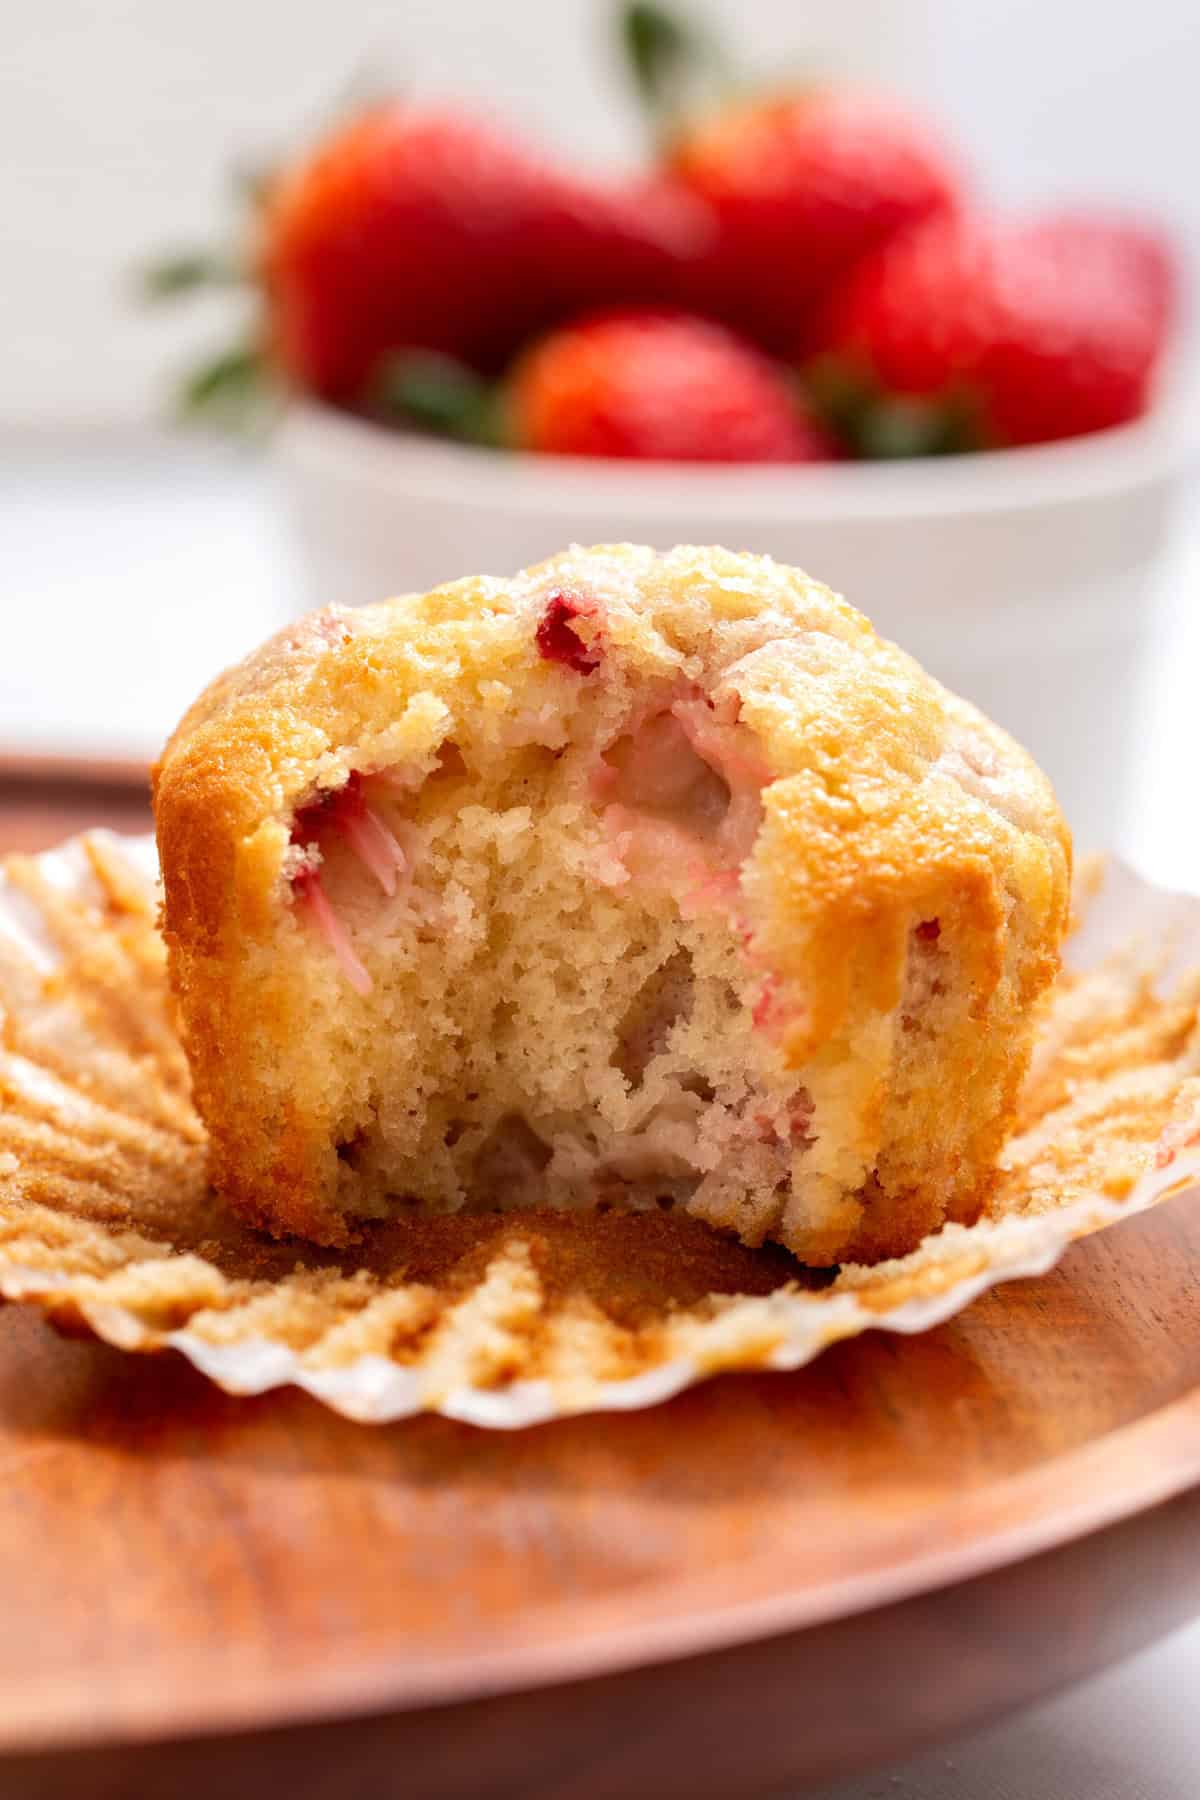 Close-up image of a strawberry muffin with a bite taken out of it.